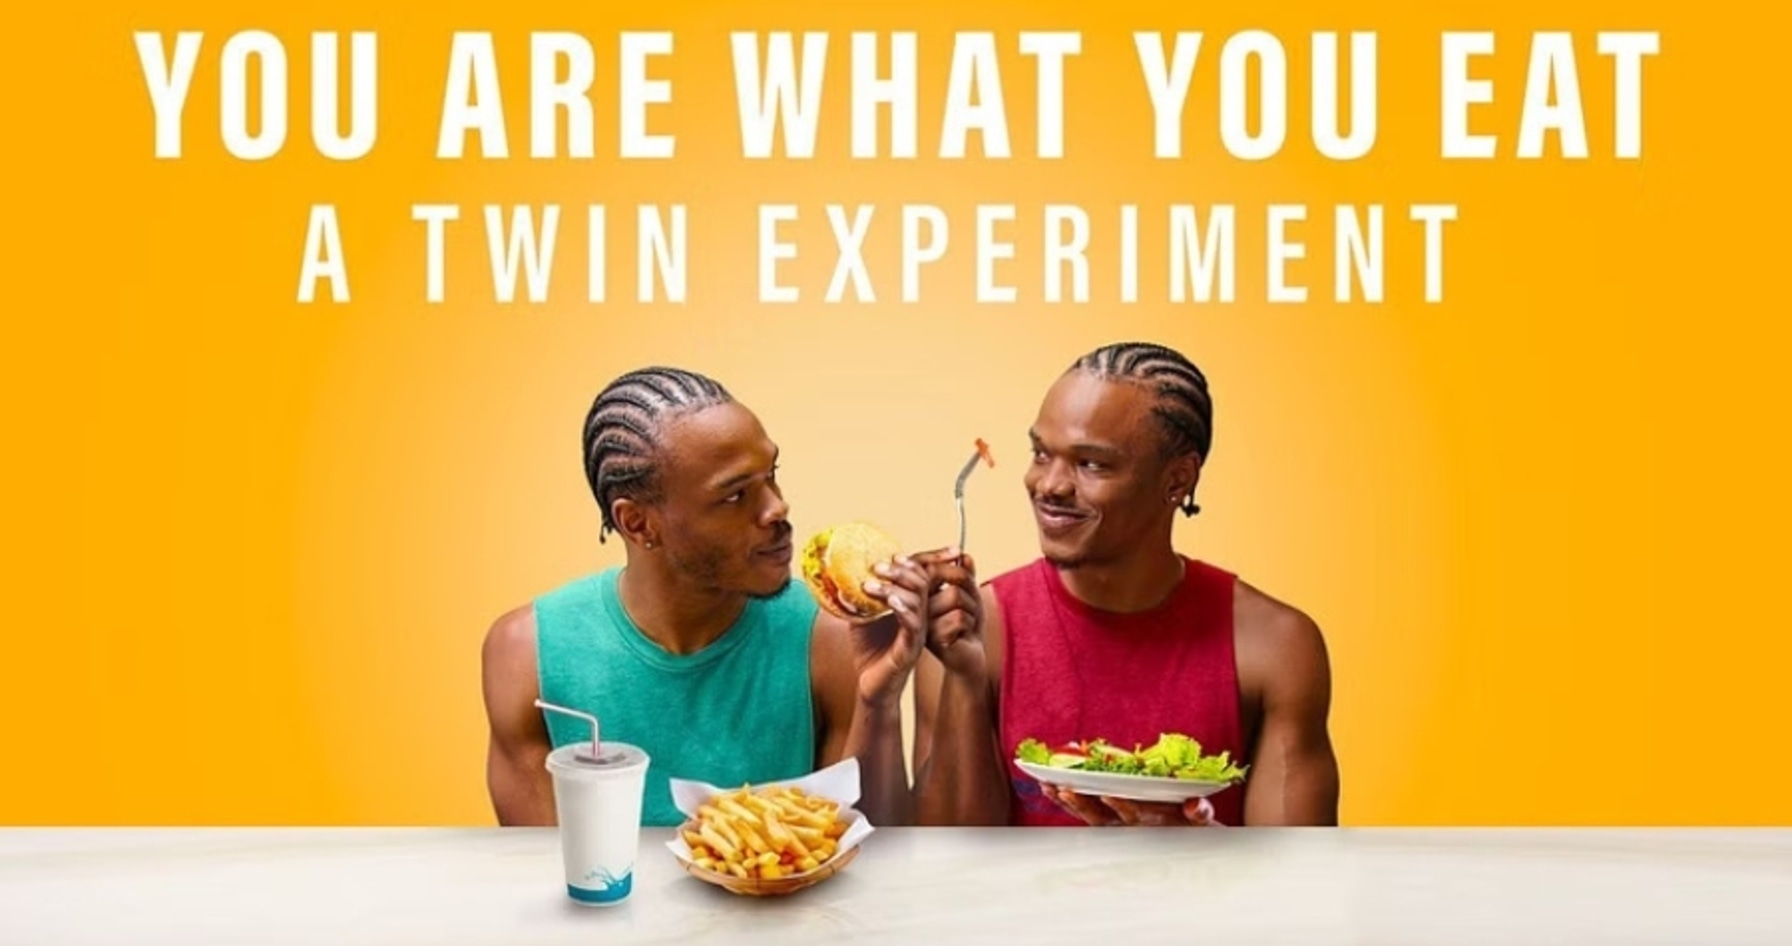 8 of the Biggest Takeaways From Hit Netflix Documentary 'You Are What You Eat: A Twin Experiment'